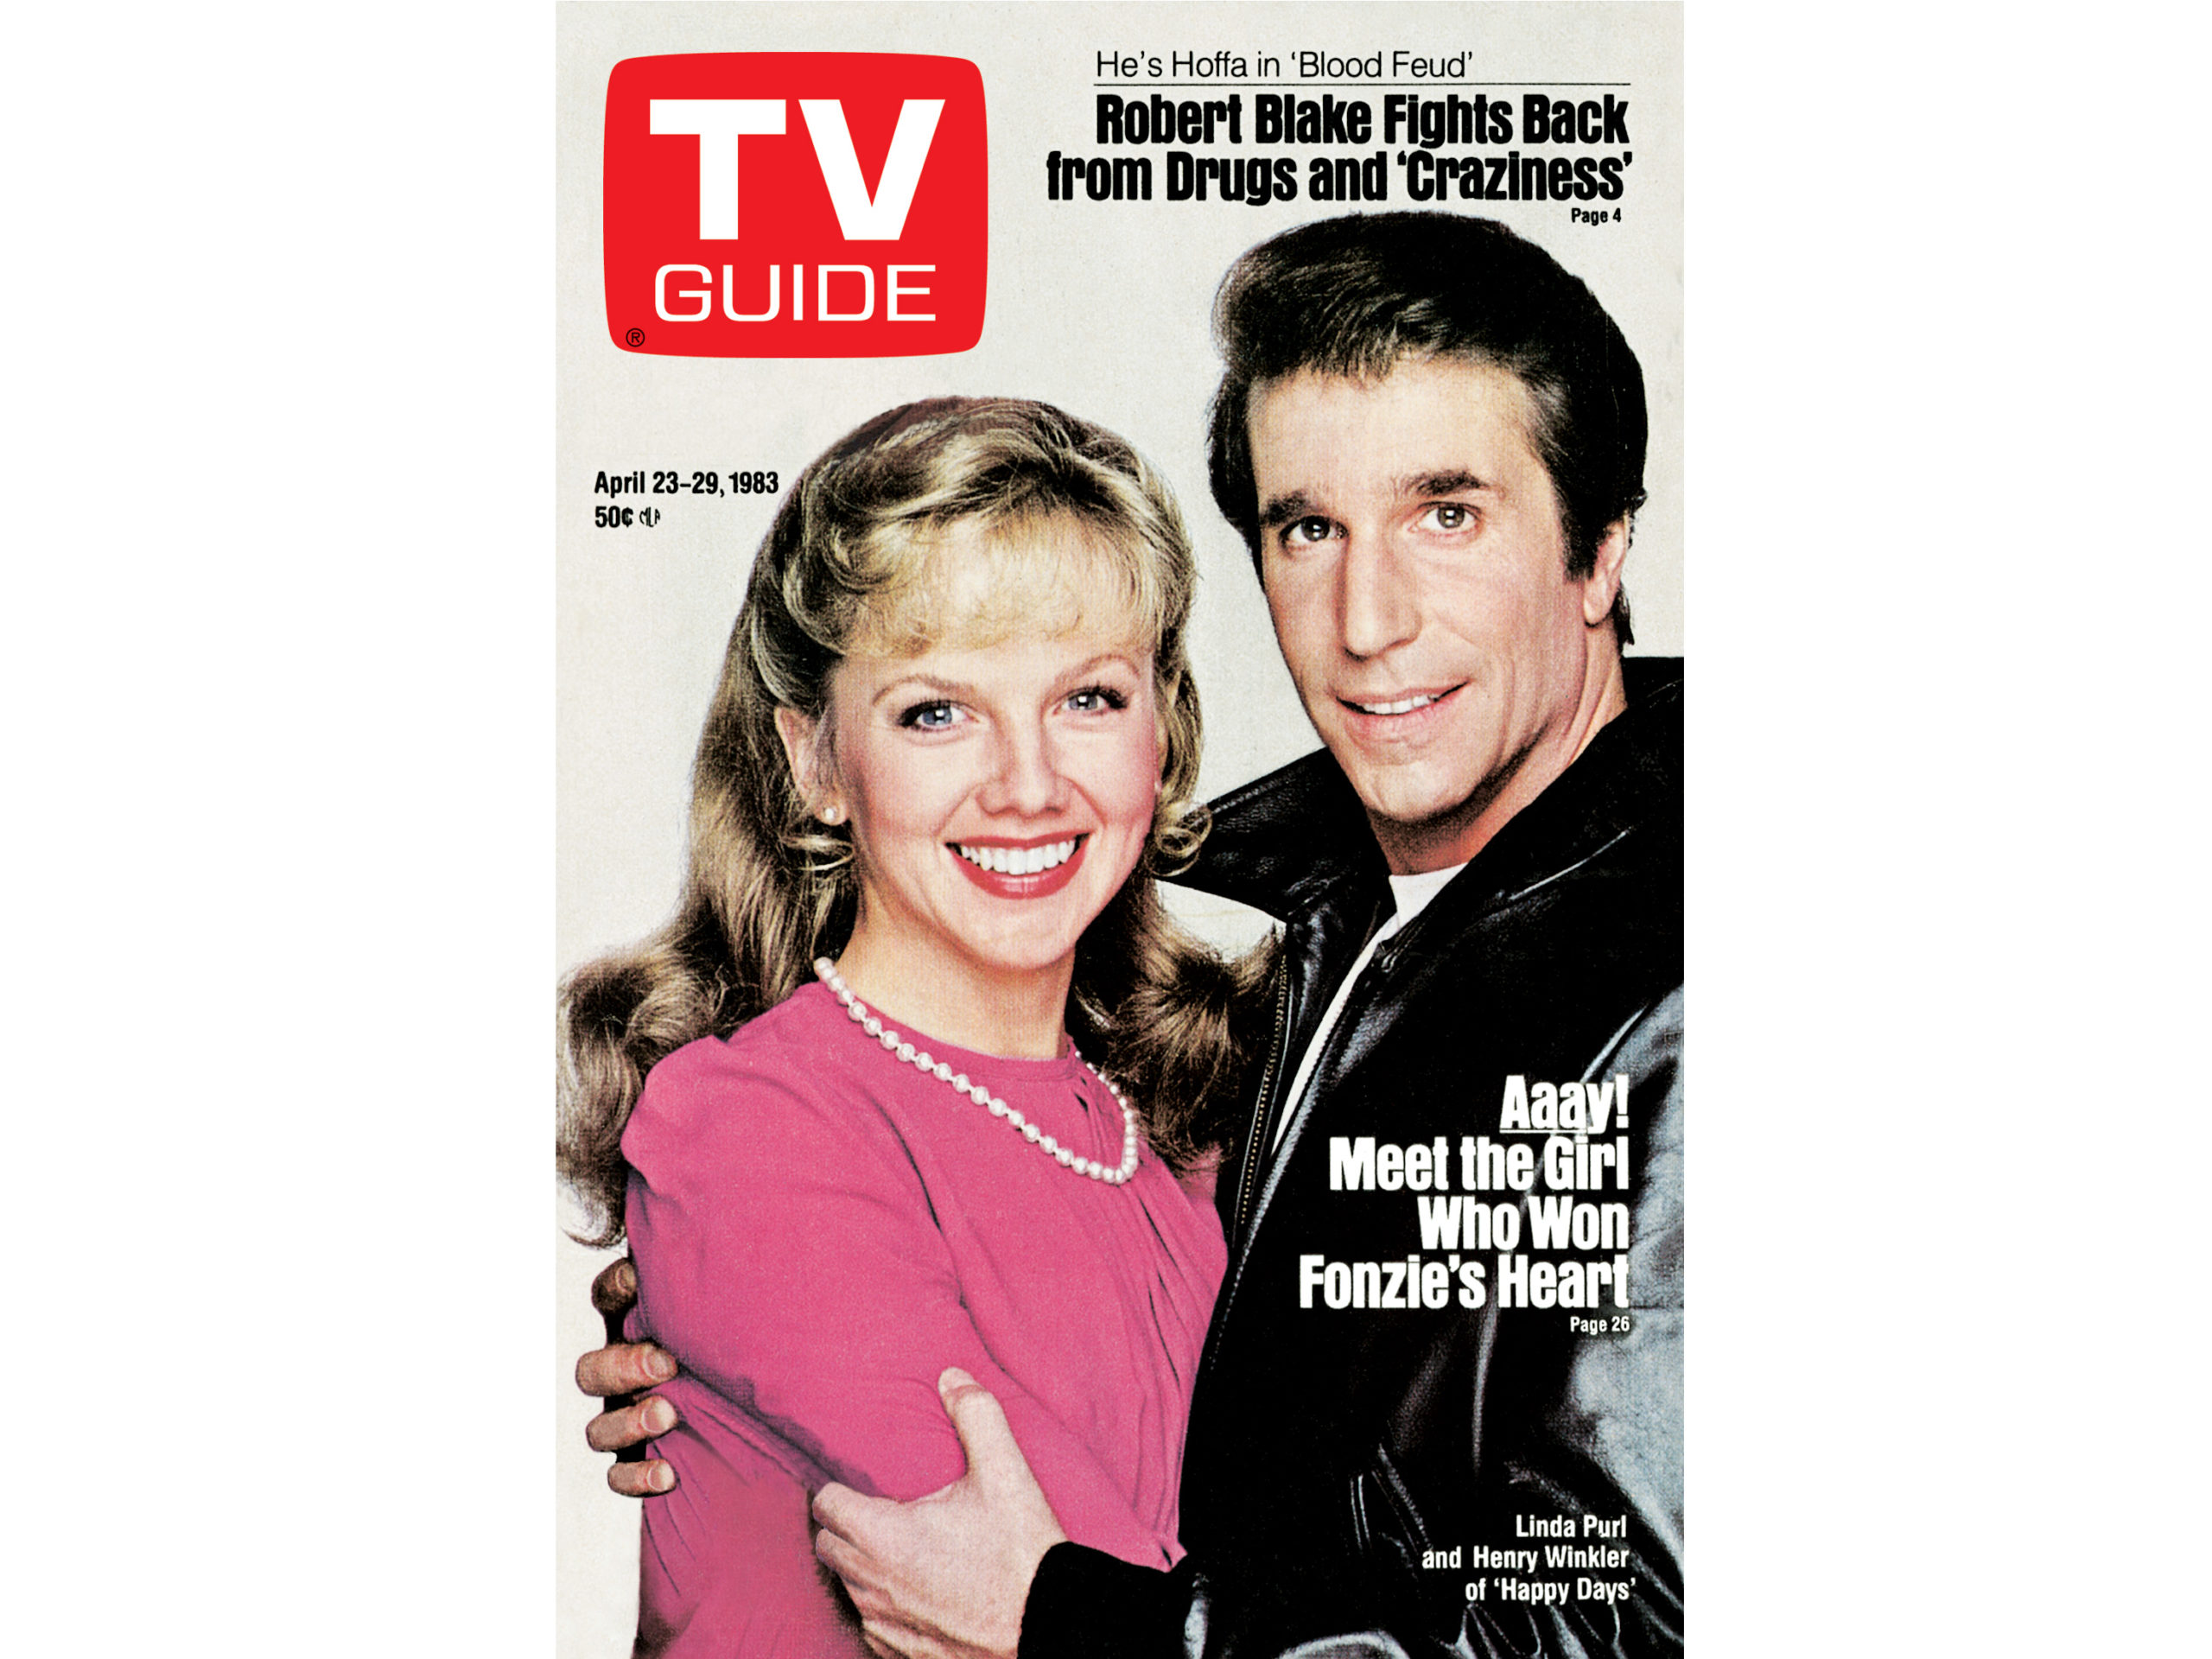 Happy Days on the cover of TV Guide - Linda Purl, Henry Winkler